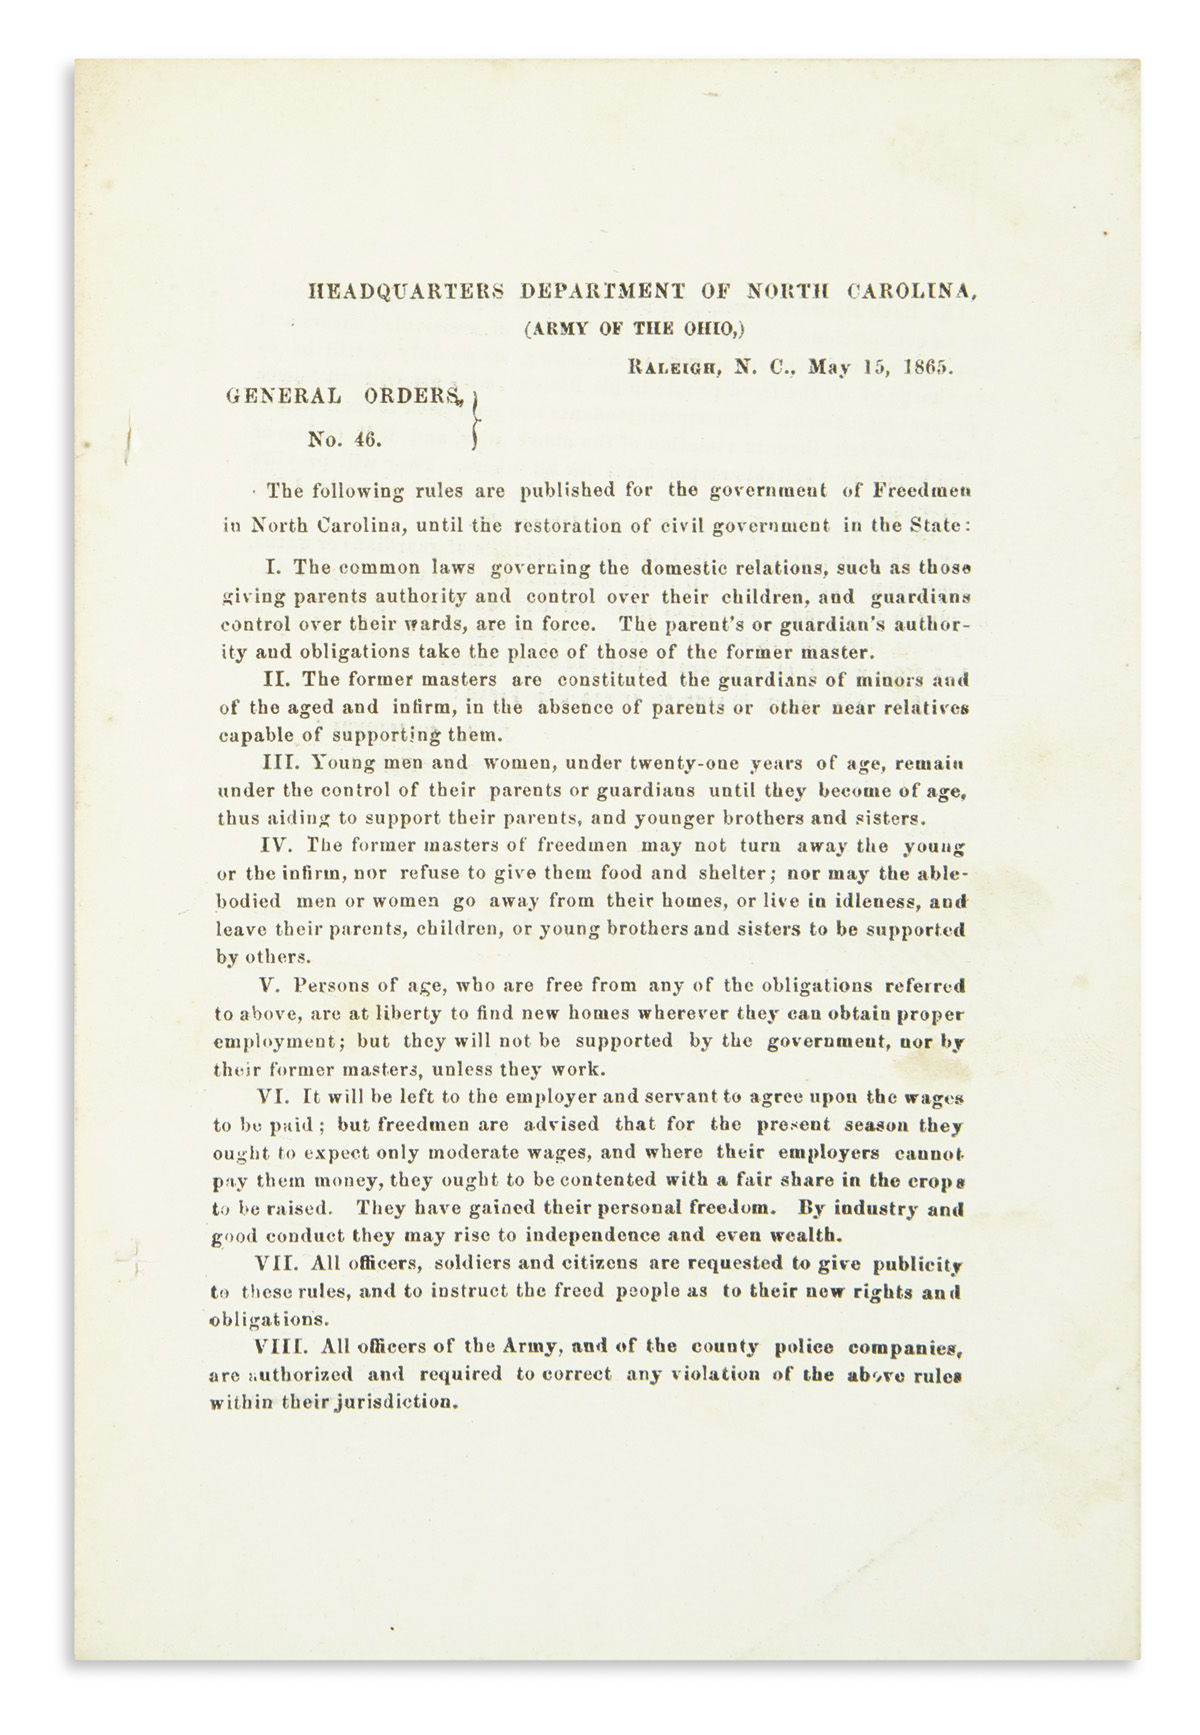 (RECONSTRUCTION.) Campbell, J.A. General order #46 concerning treatment of freedmen in North Carolina just after the end of fighting.